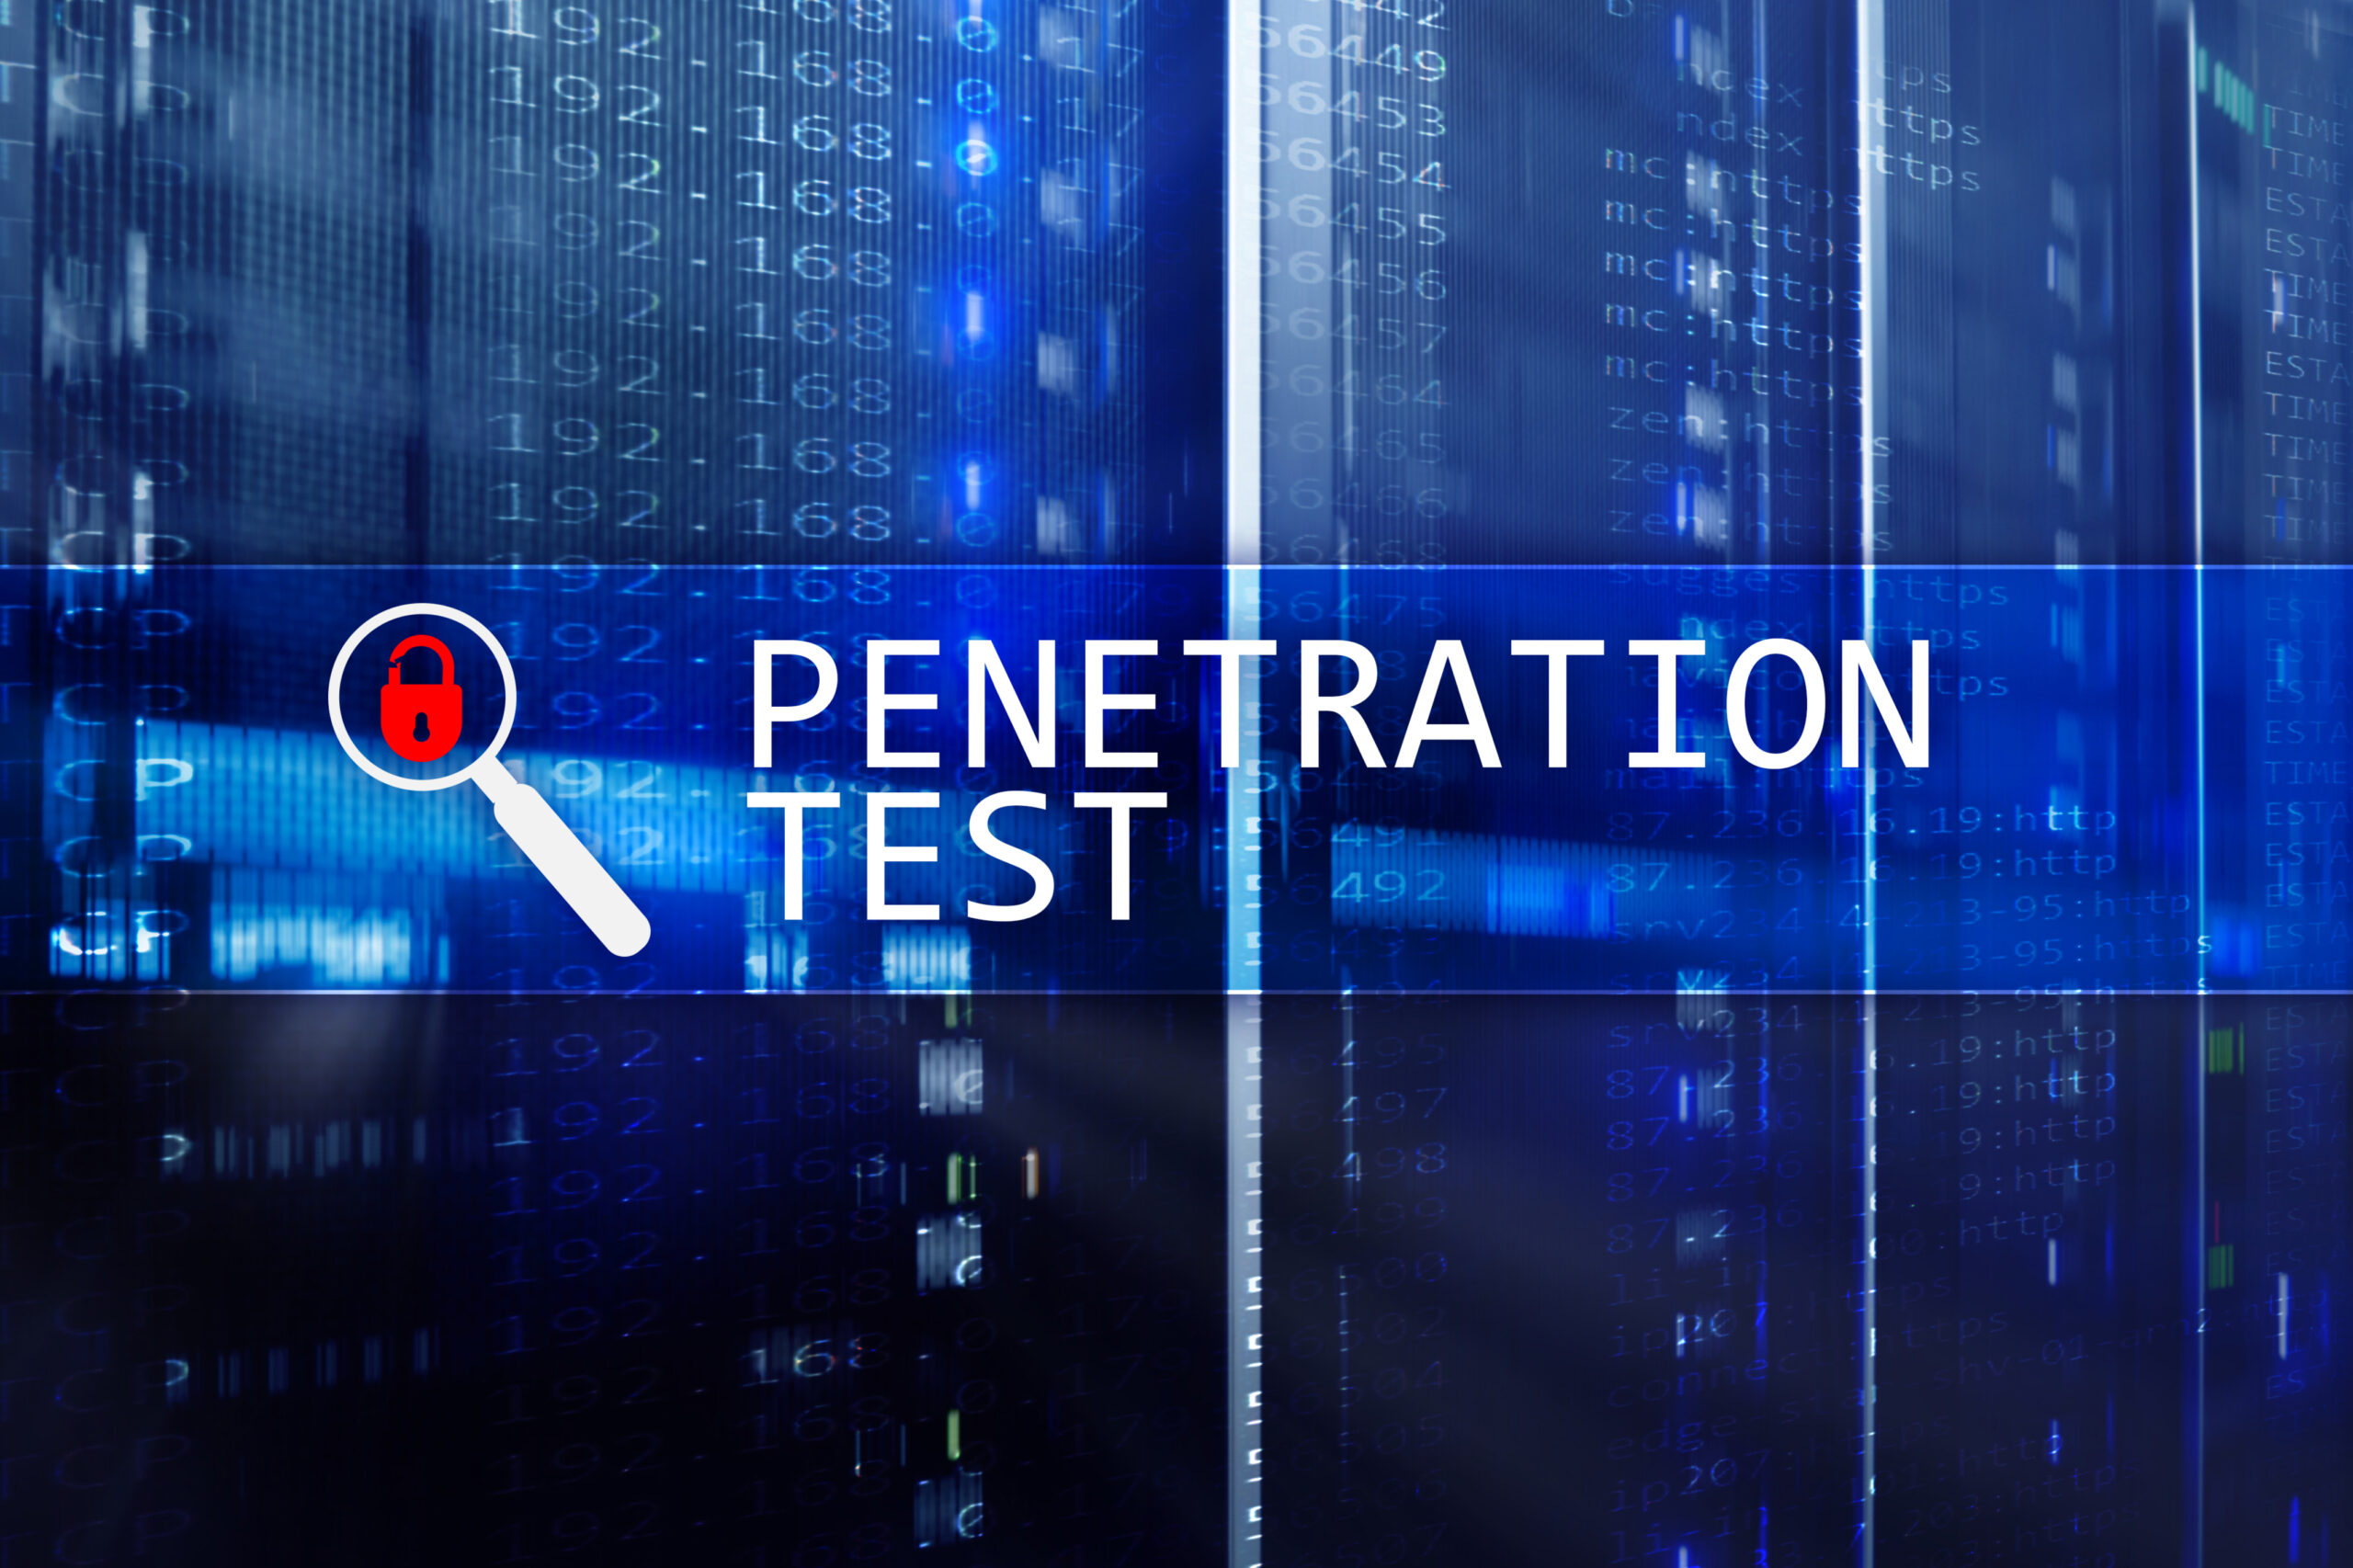 "Penetration Testing" on a blue background with a spyglass